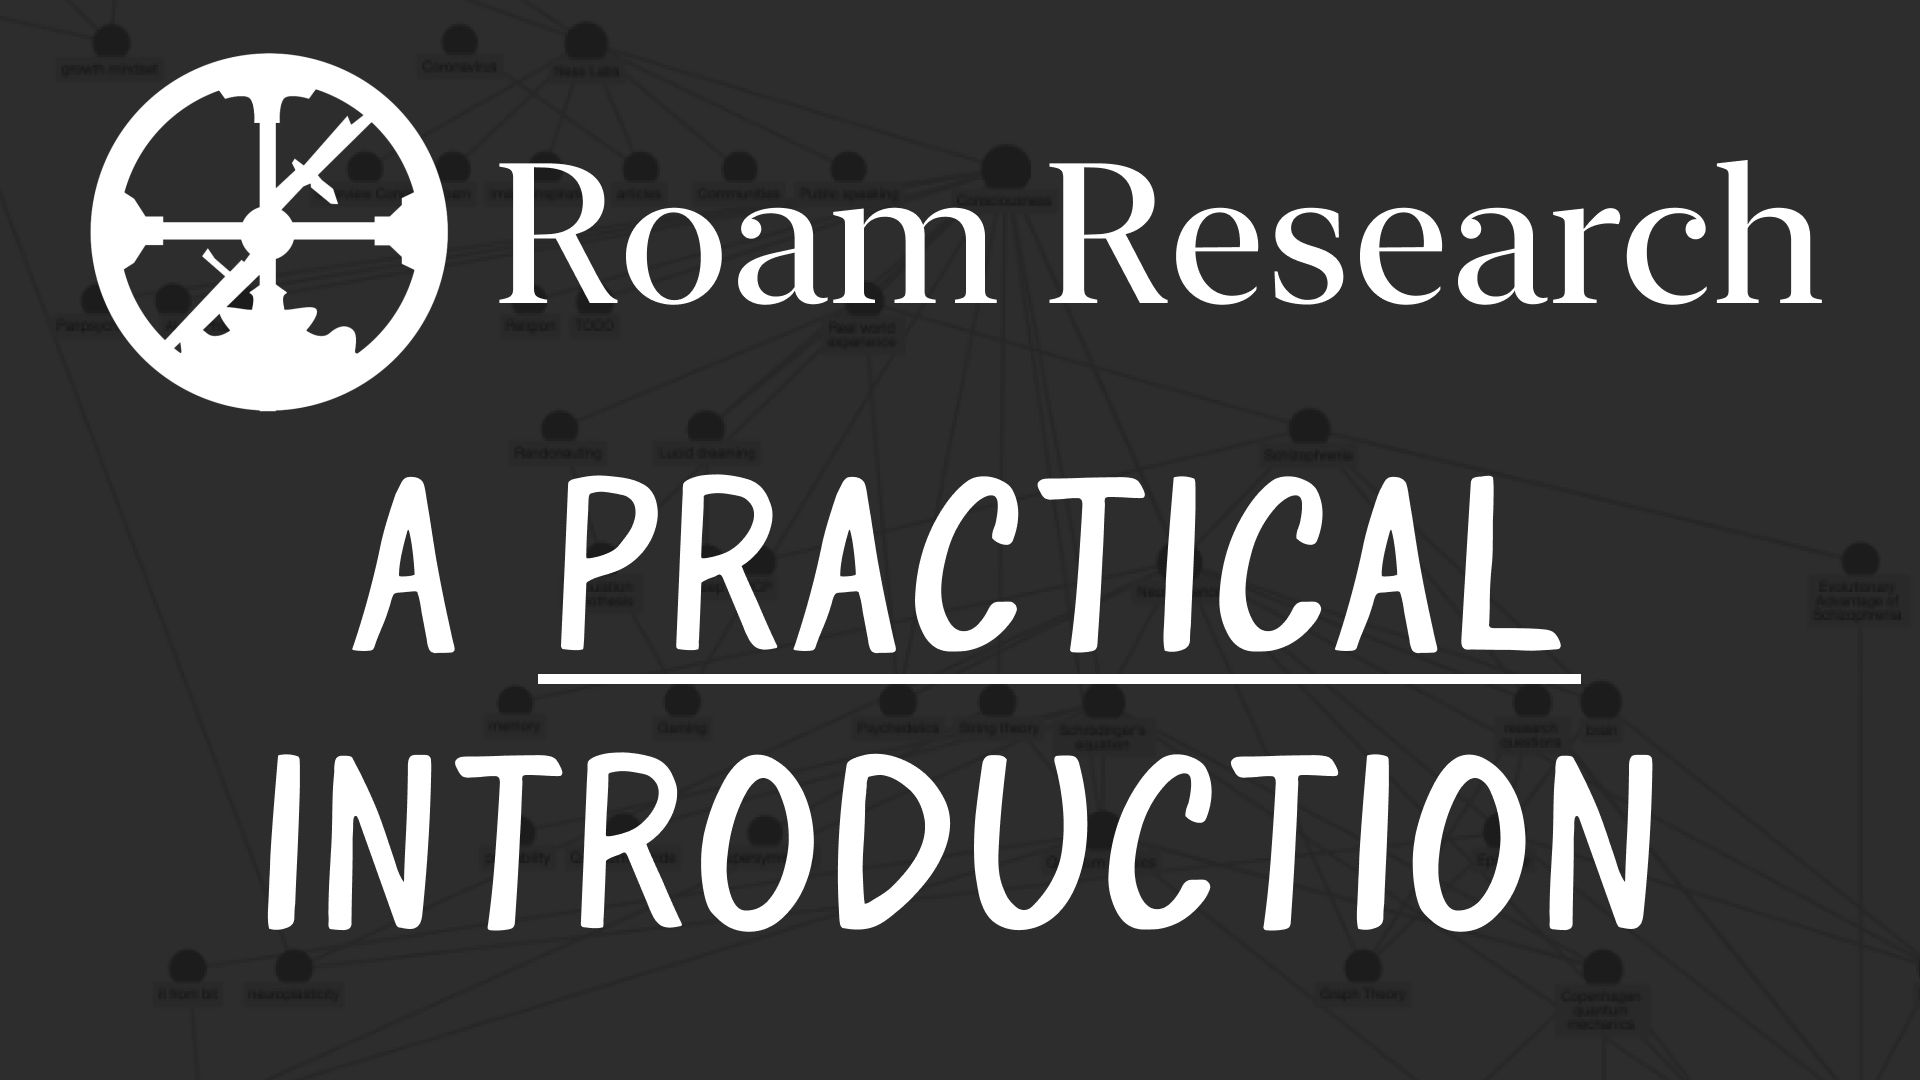 A Practical Introduction to Roam Research